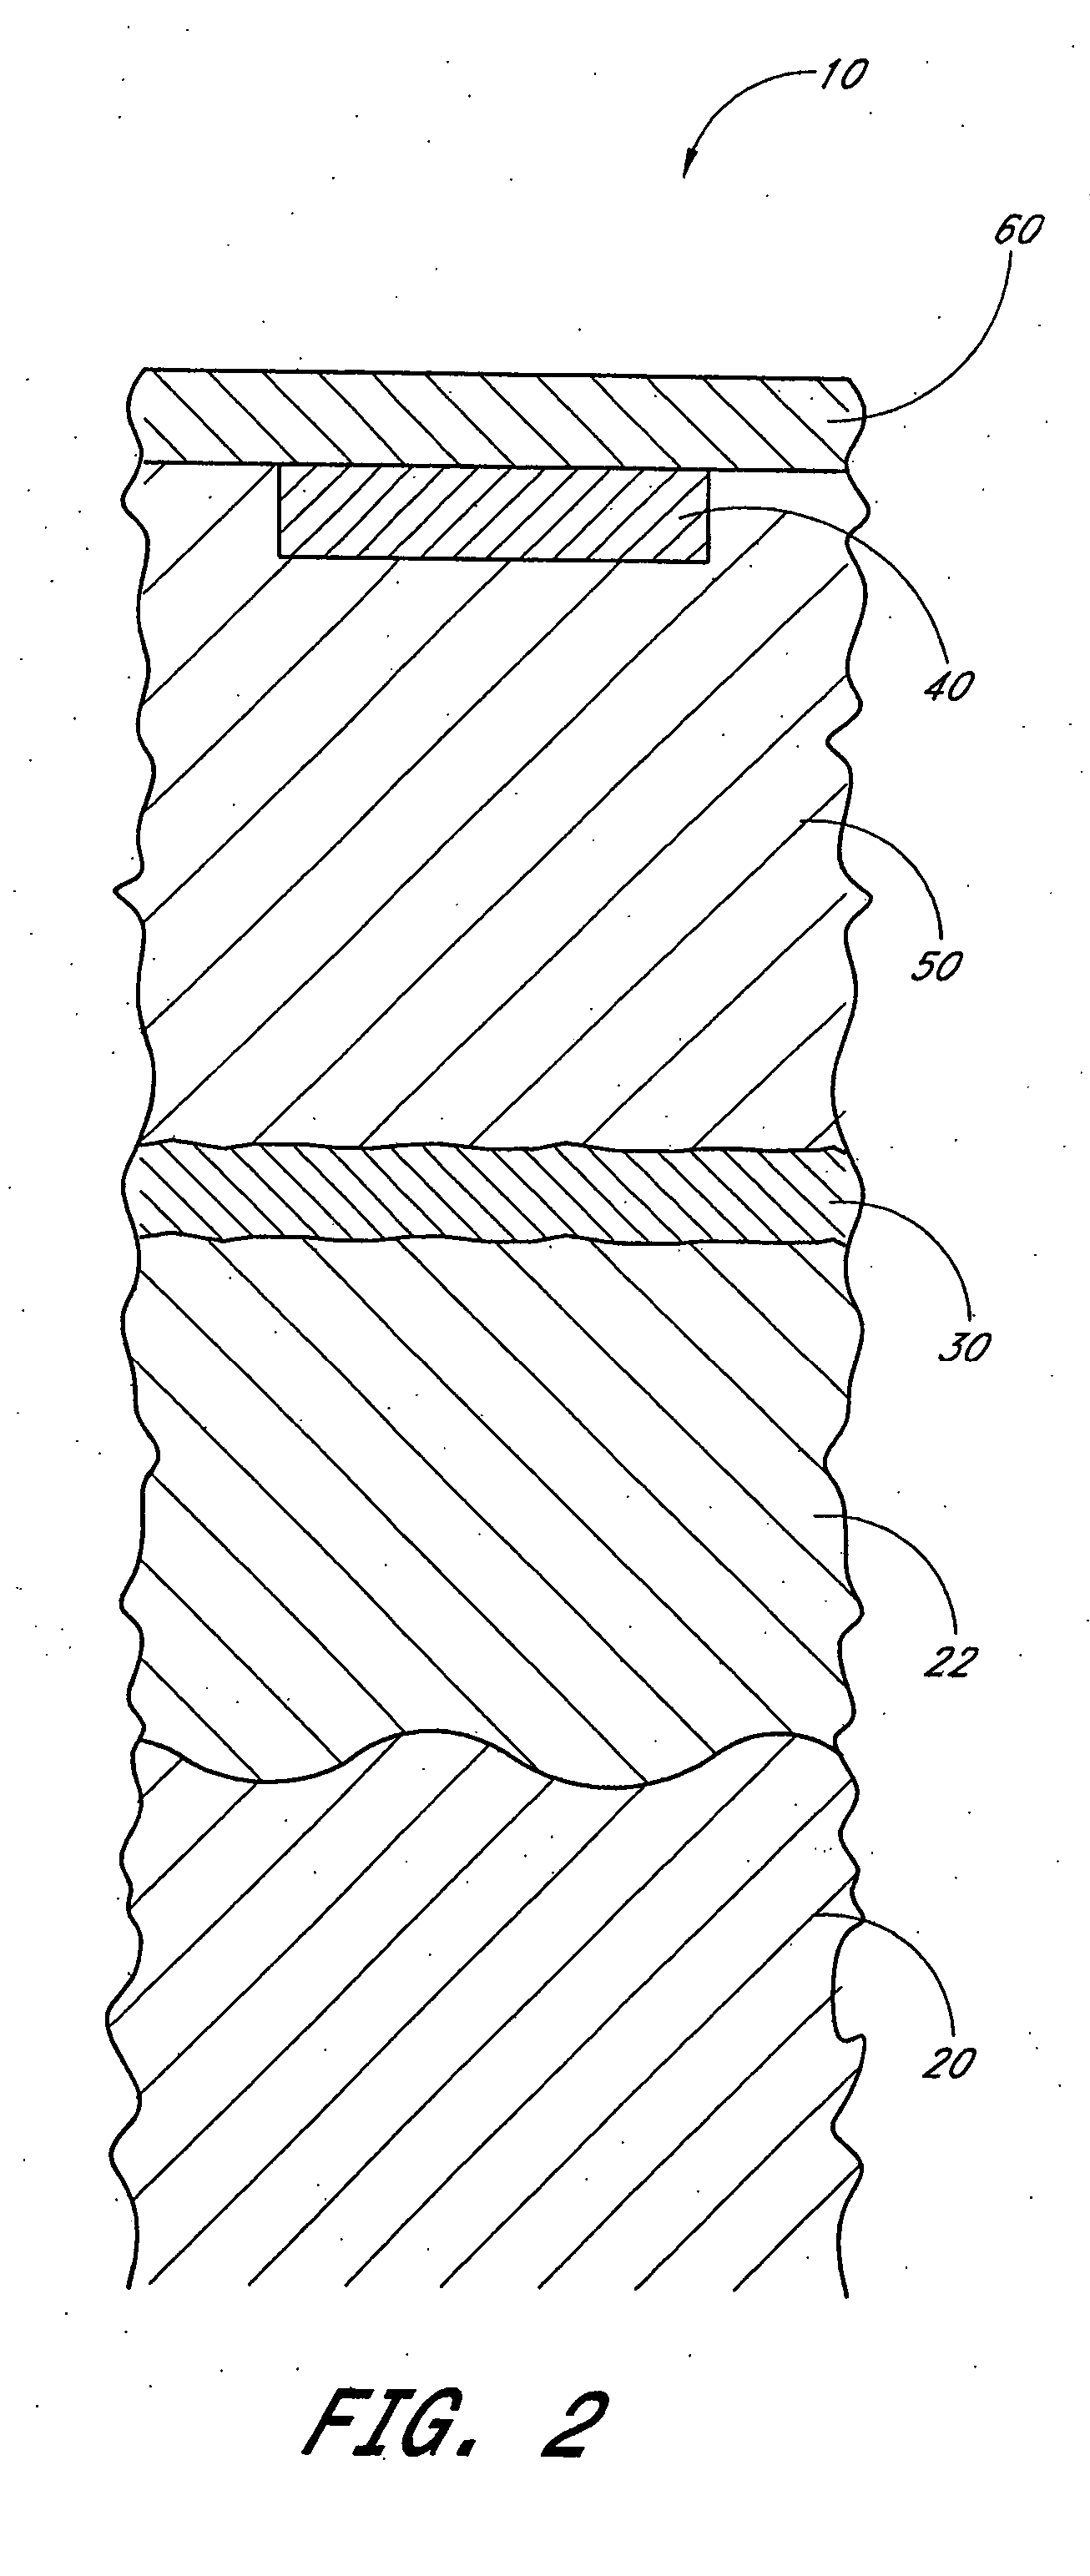 Device and method for providing phototherapy to the brain